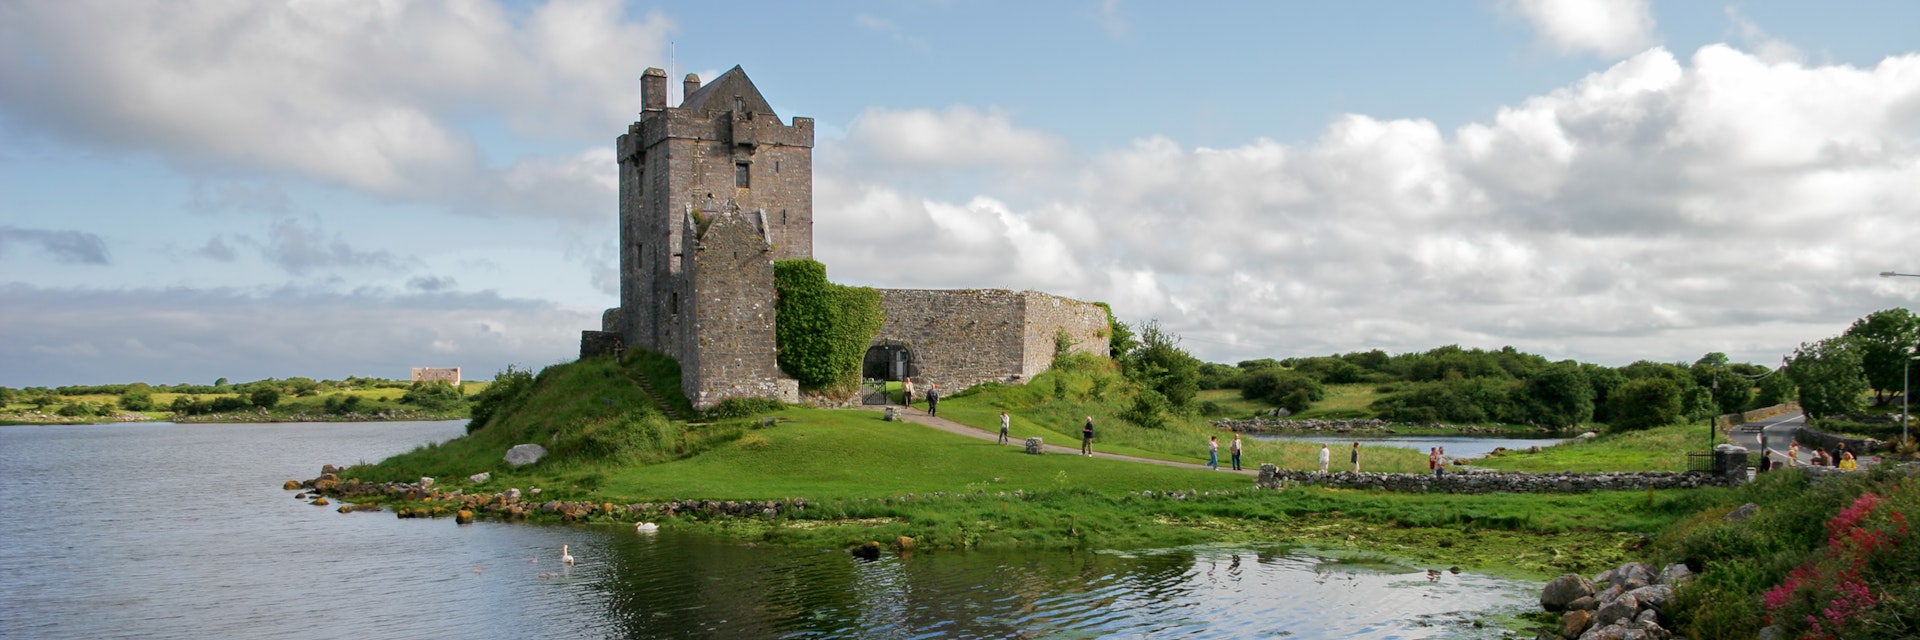 View of the Dunguaire Castle, Kinvara Bay, Galway, Ireland